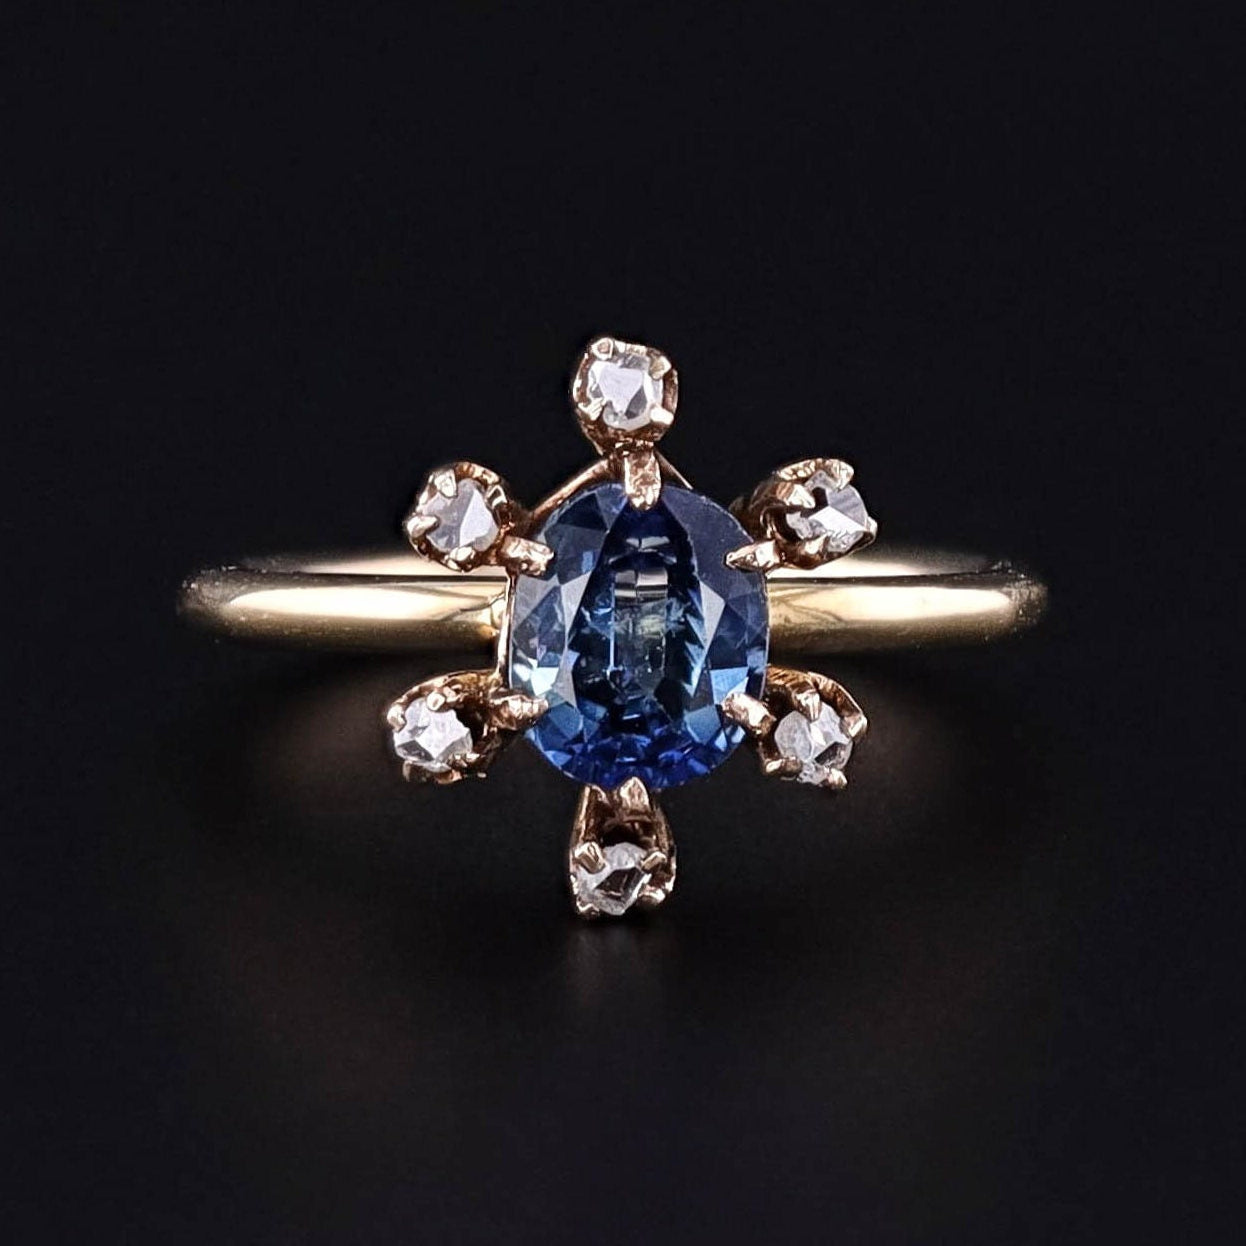 Antique Natural Sapphire and Diamond Conversion Ring of 14k Gold